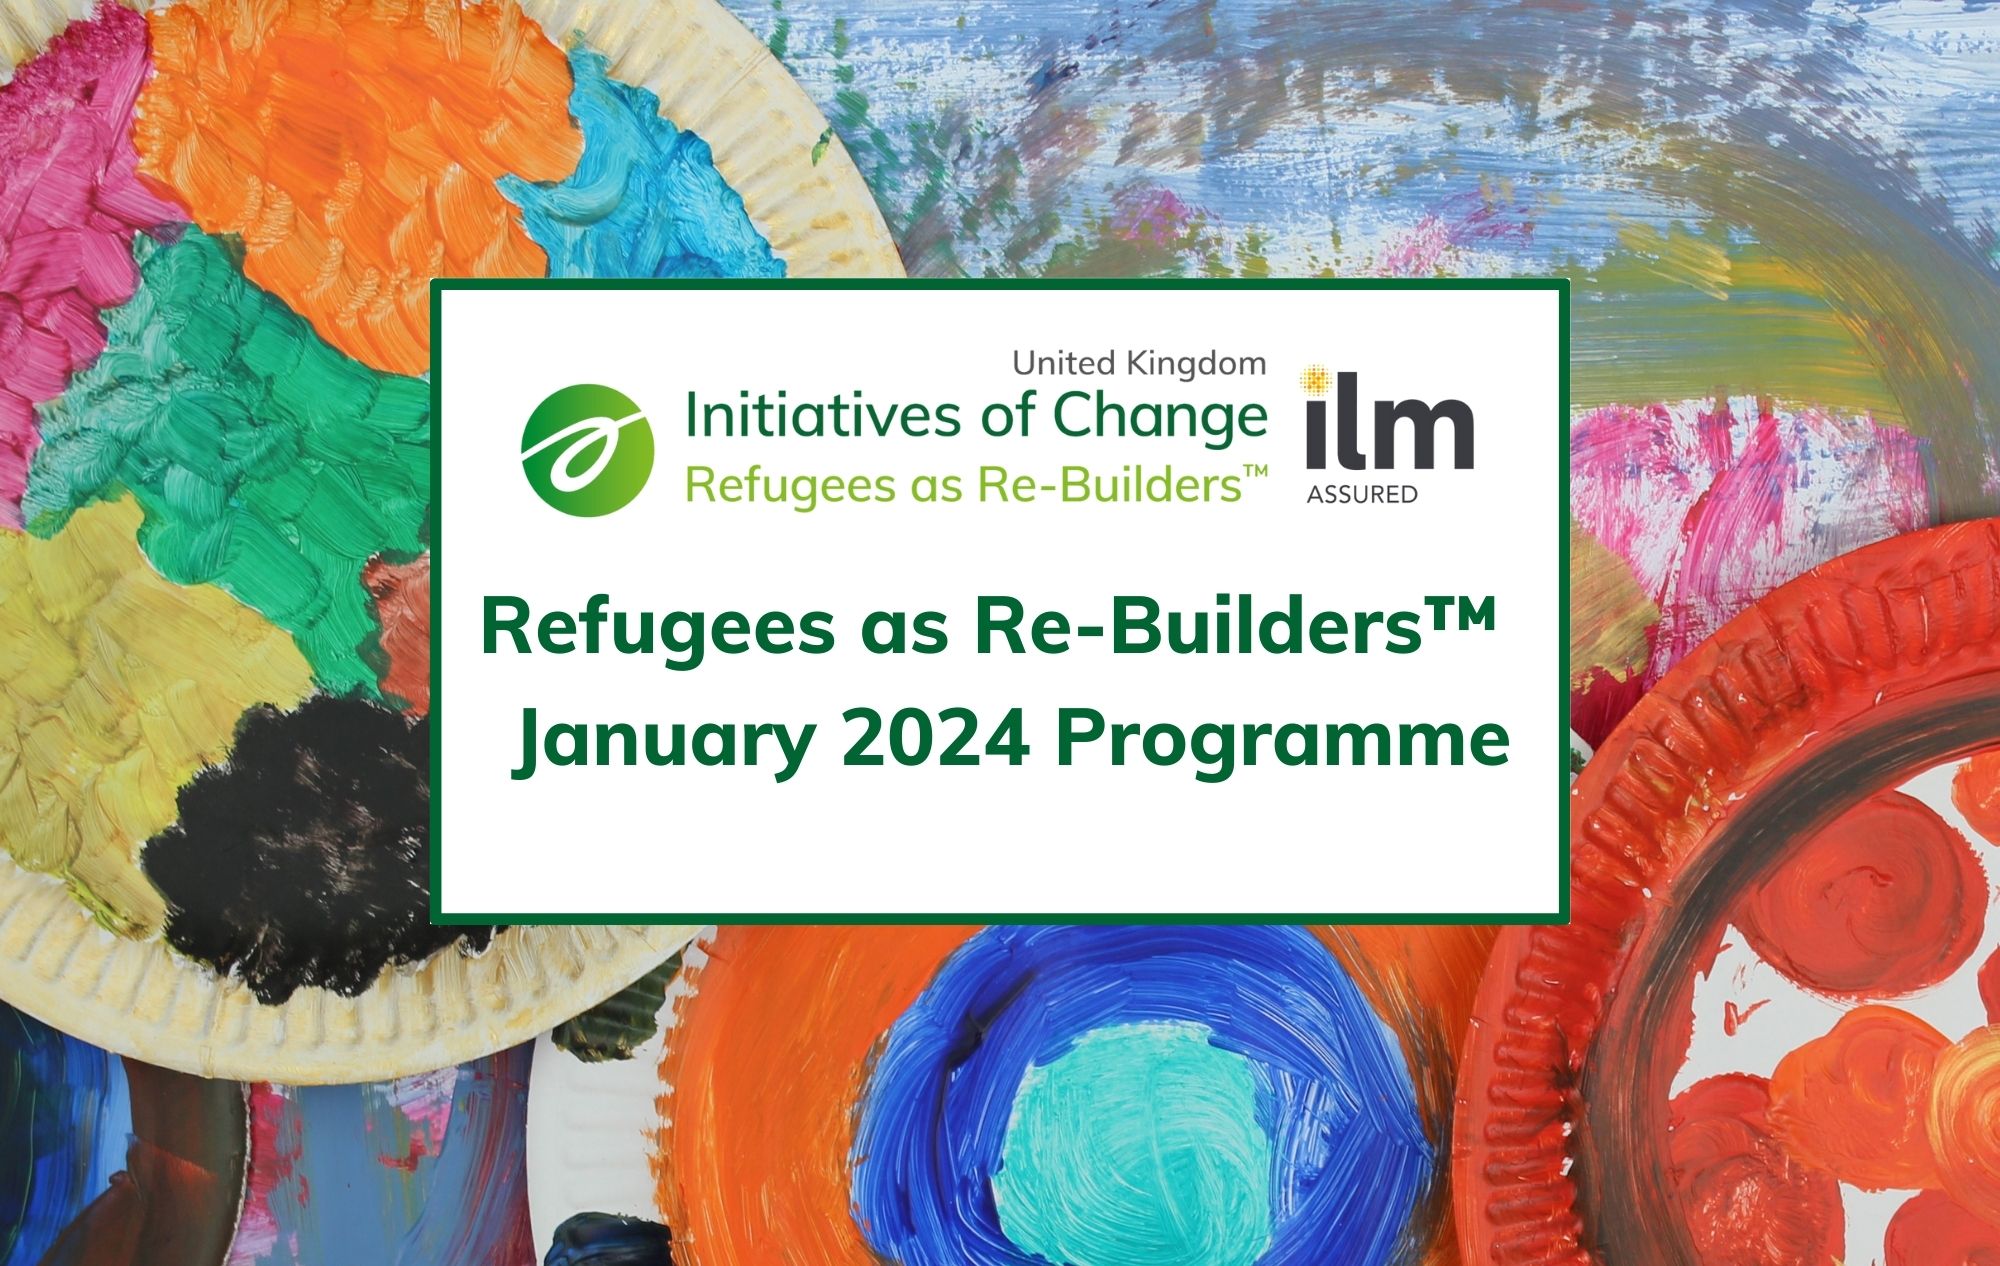 Refugees as Re-Builders 2023 Programme